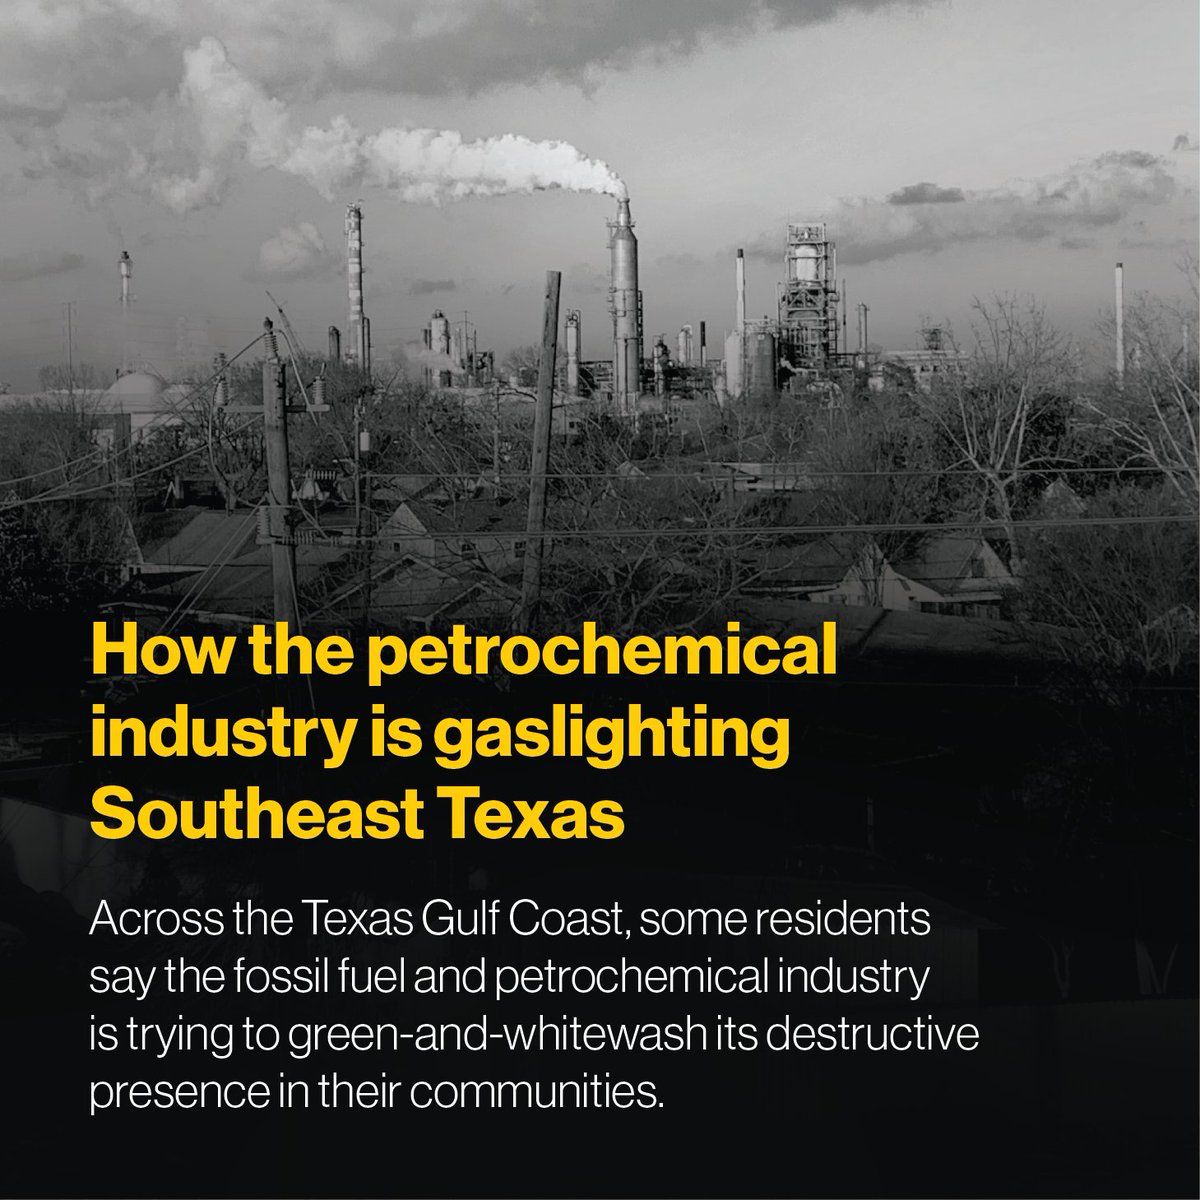 As petrochemical operations expand across the Texas Gulf Coast, residents say the industry is green-and-whitewashing its destructive presence in their communities. exxonknews.org/p/how-the-petr…